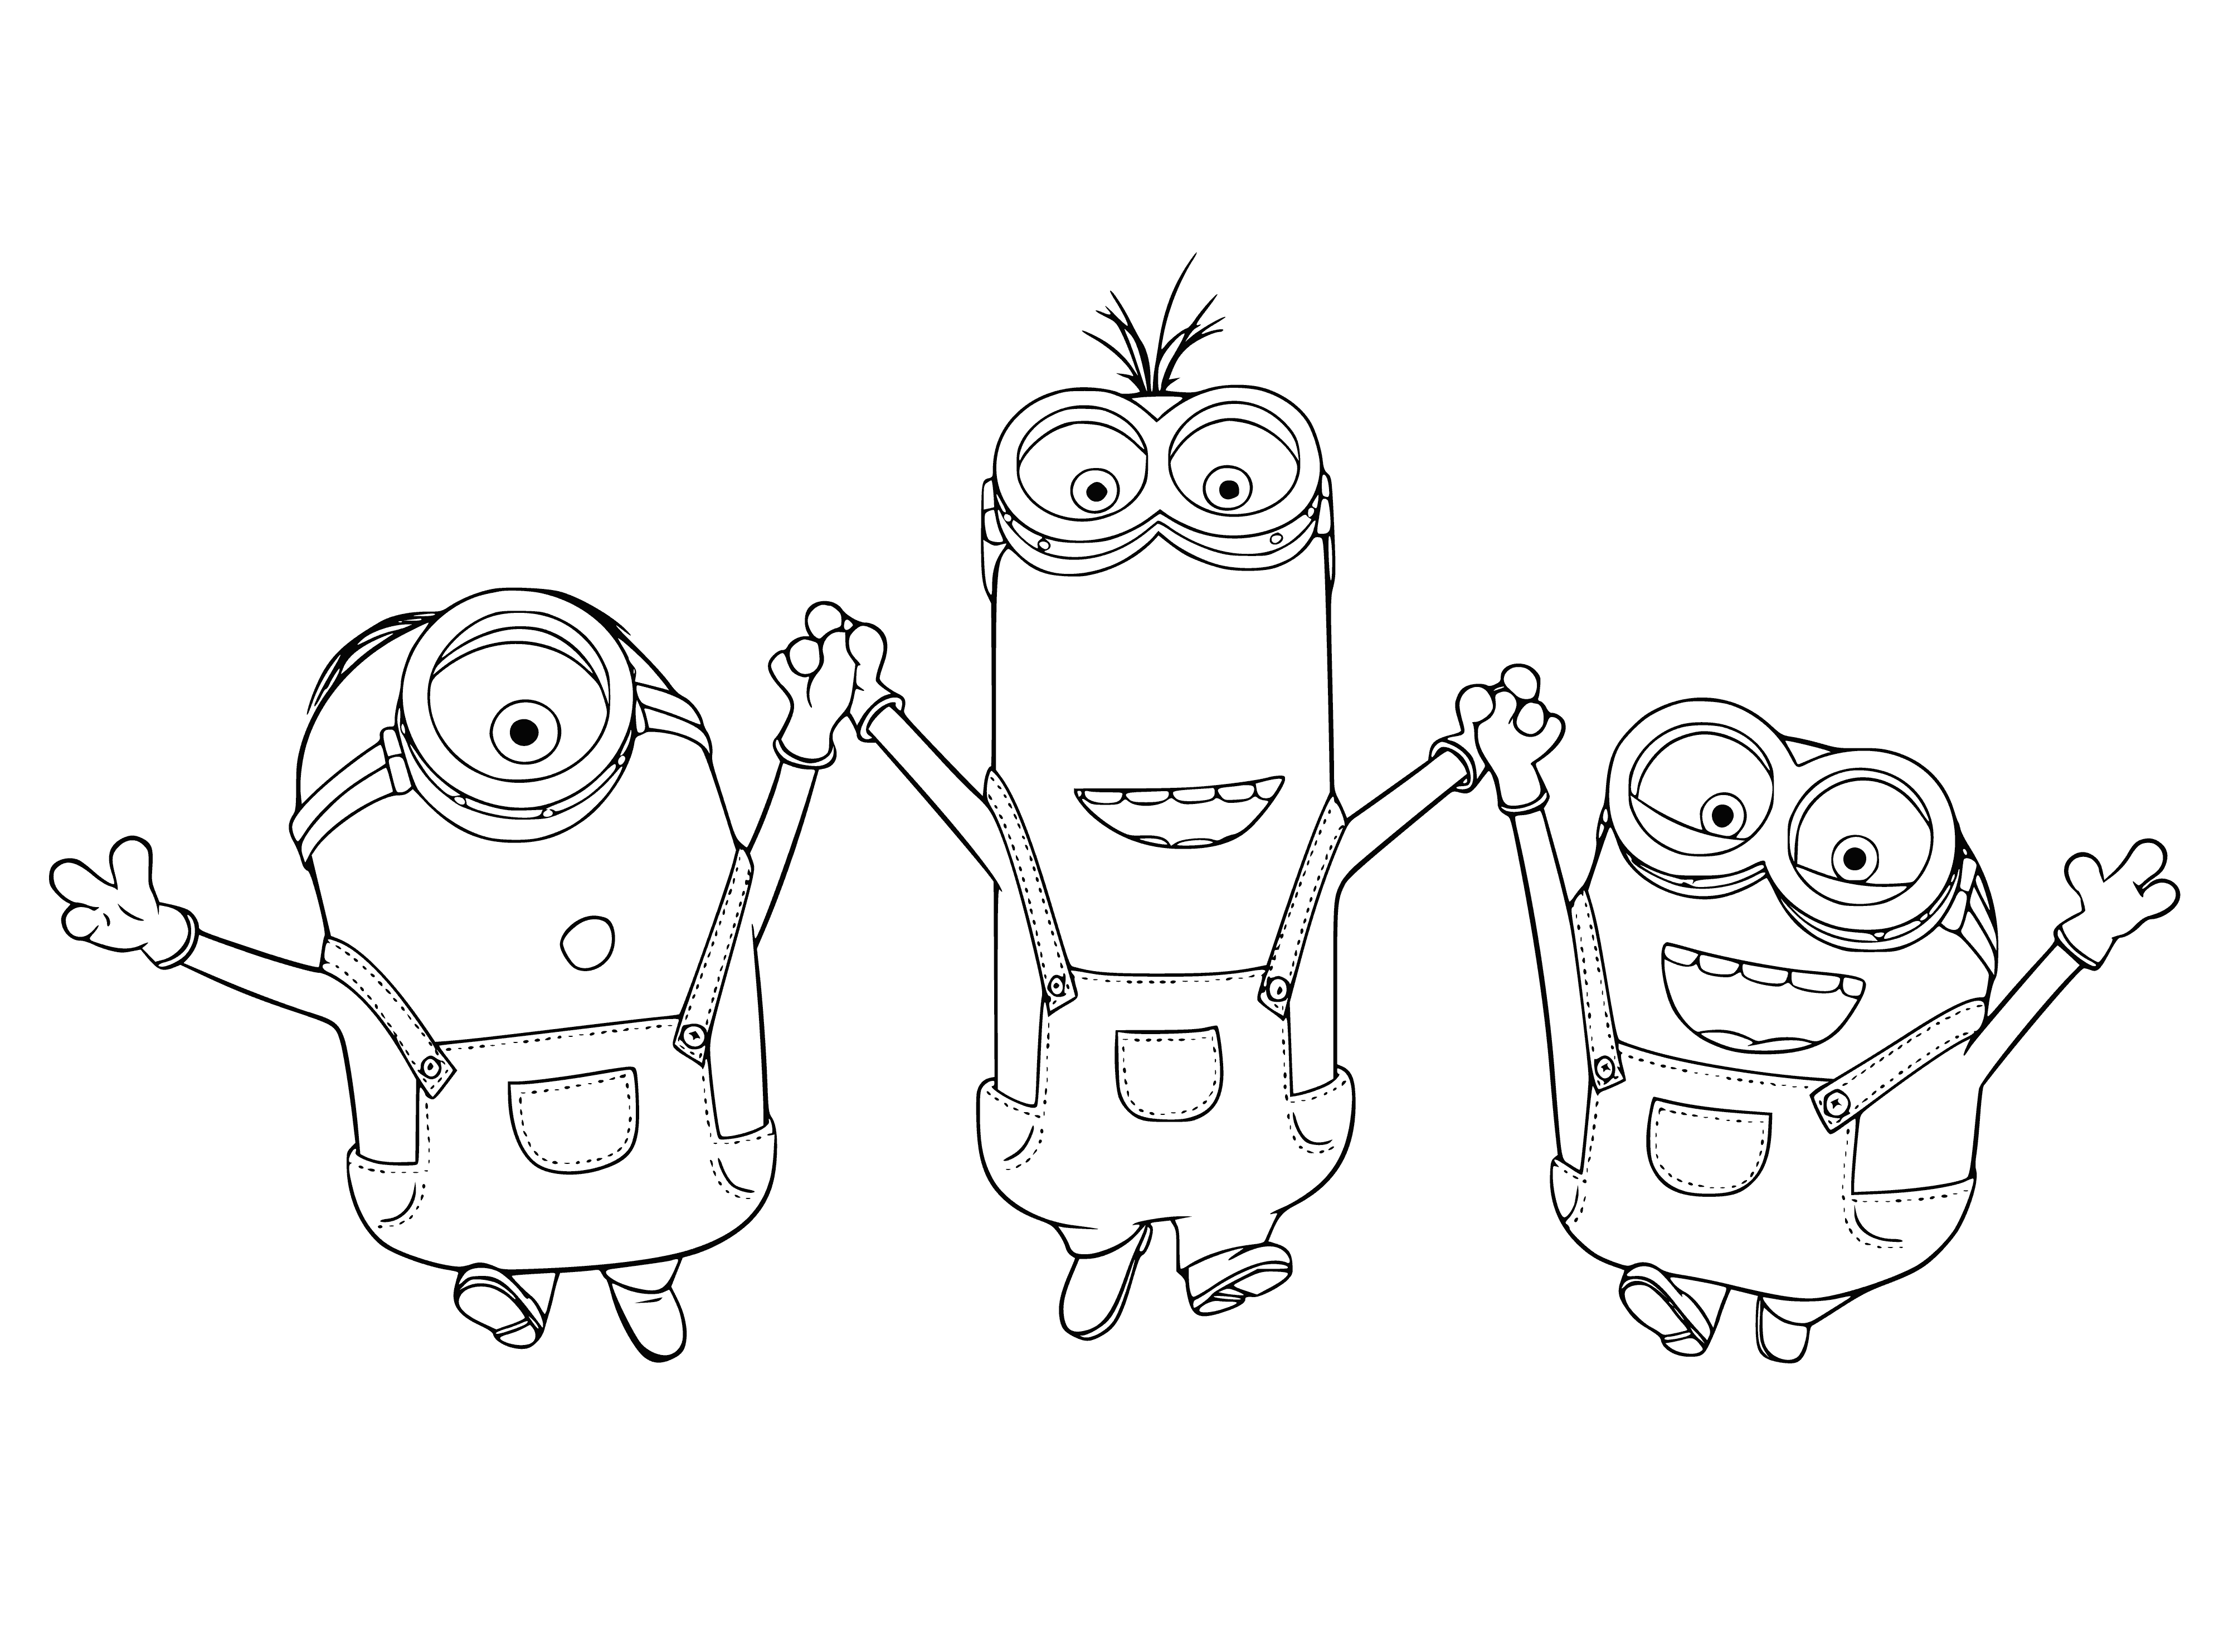 Minions Stewart, Kevin and Bob coloring page